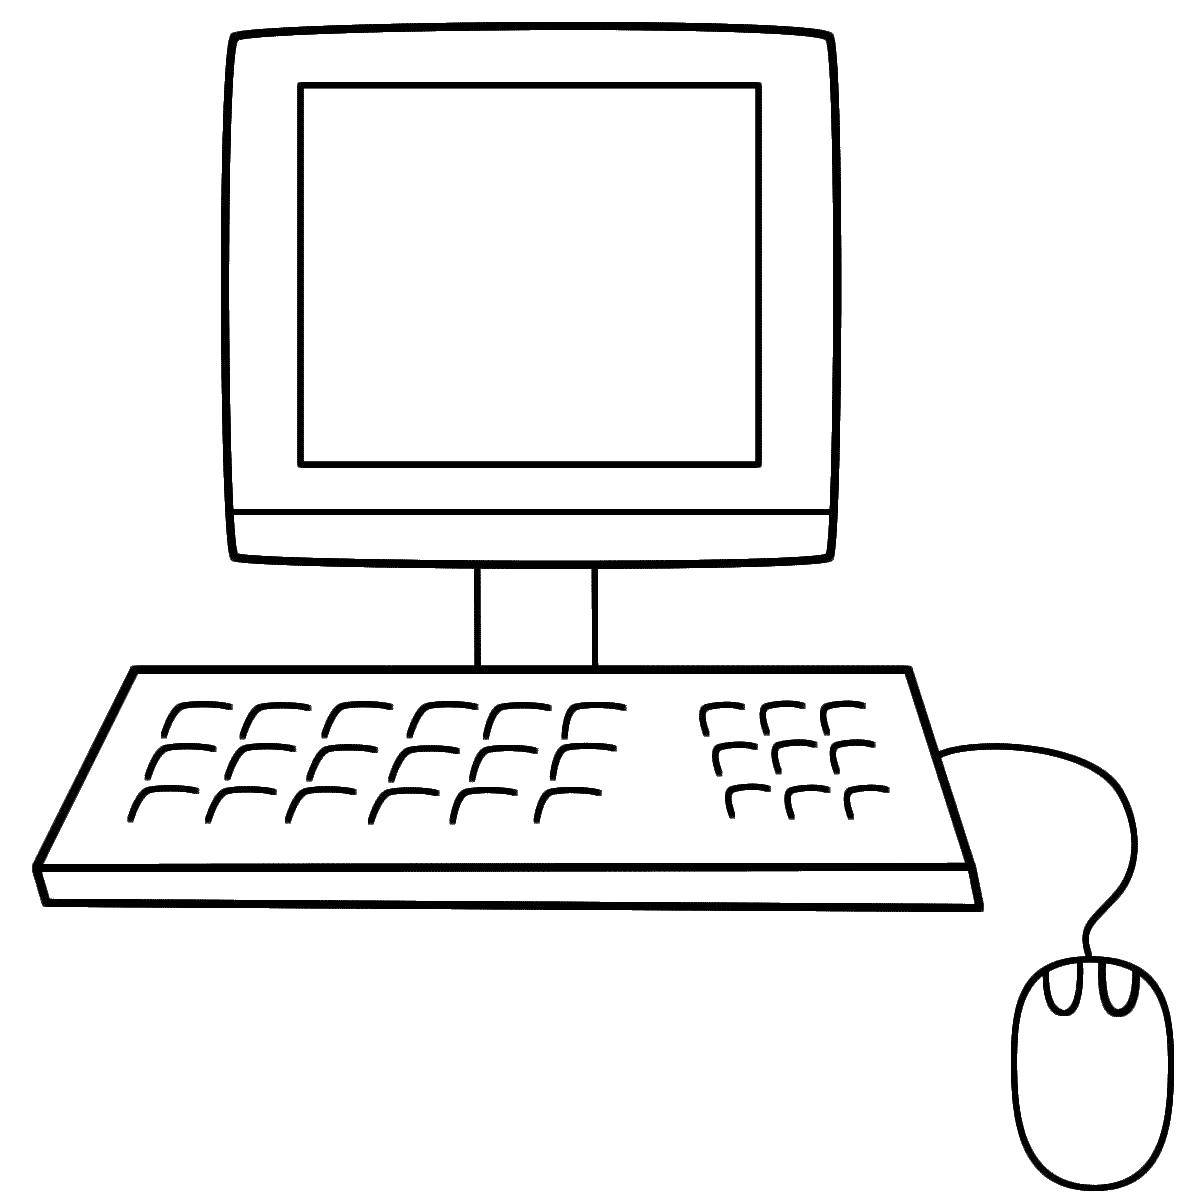 Coloring Monitor and keyboard. Category coloring. Tags:  monitor, keyboard, mouse.